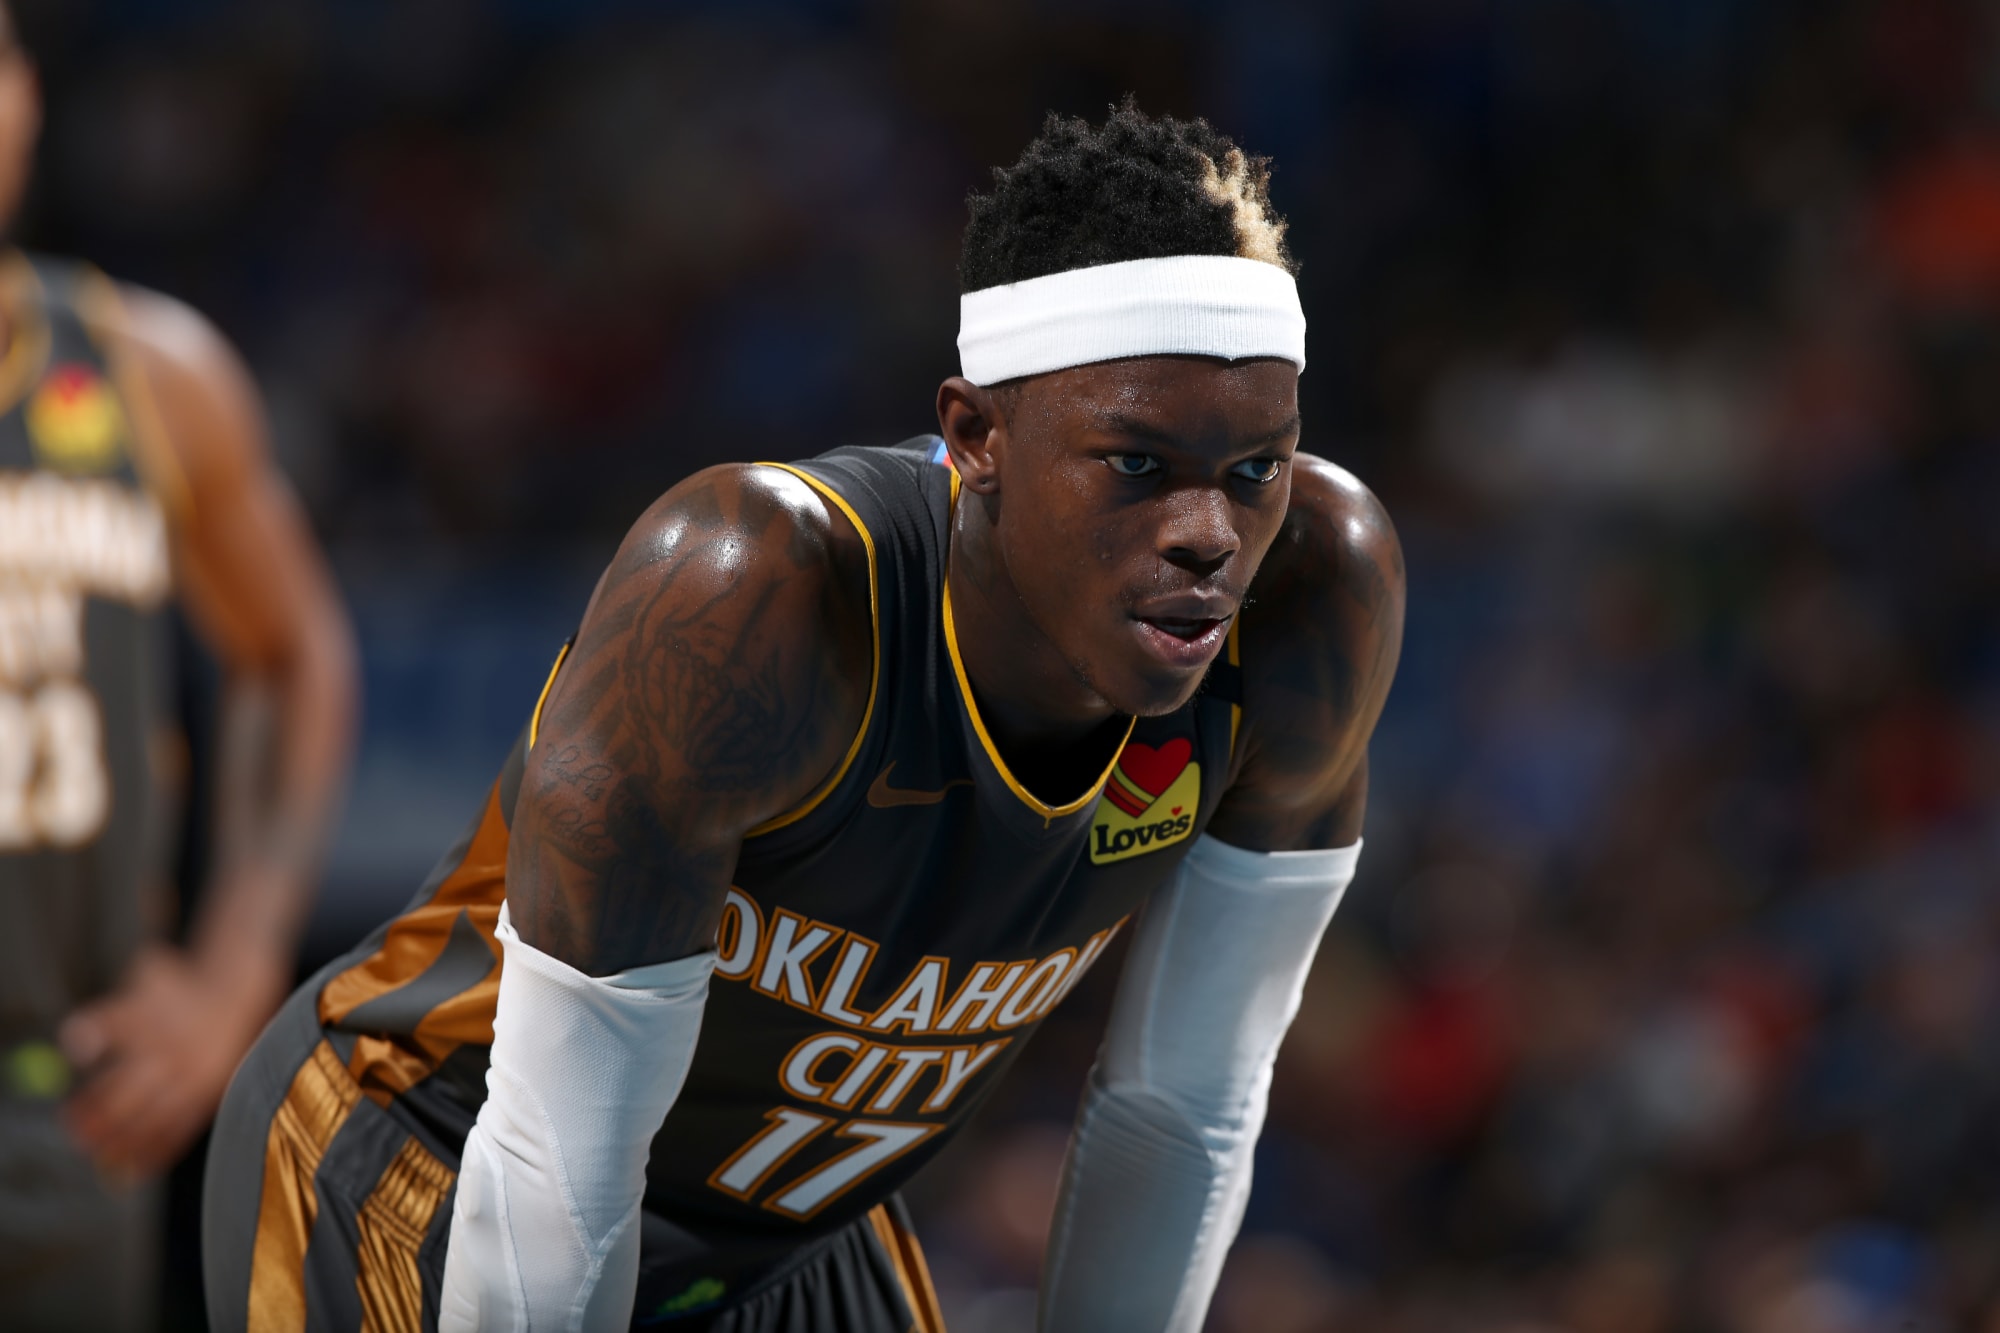 Oklahoma City Thunder Dennis Schroder, Sixth Man of the Year candidate